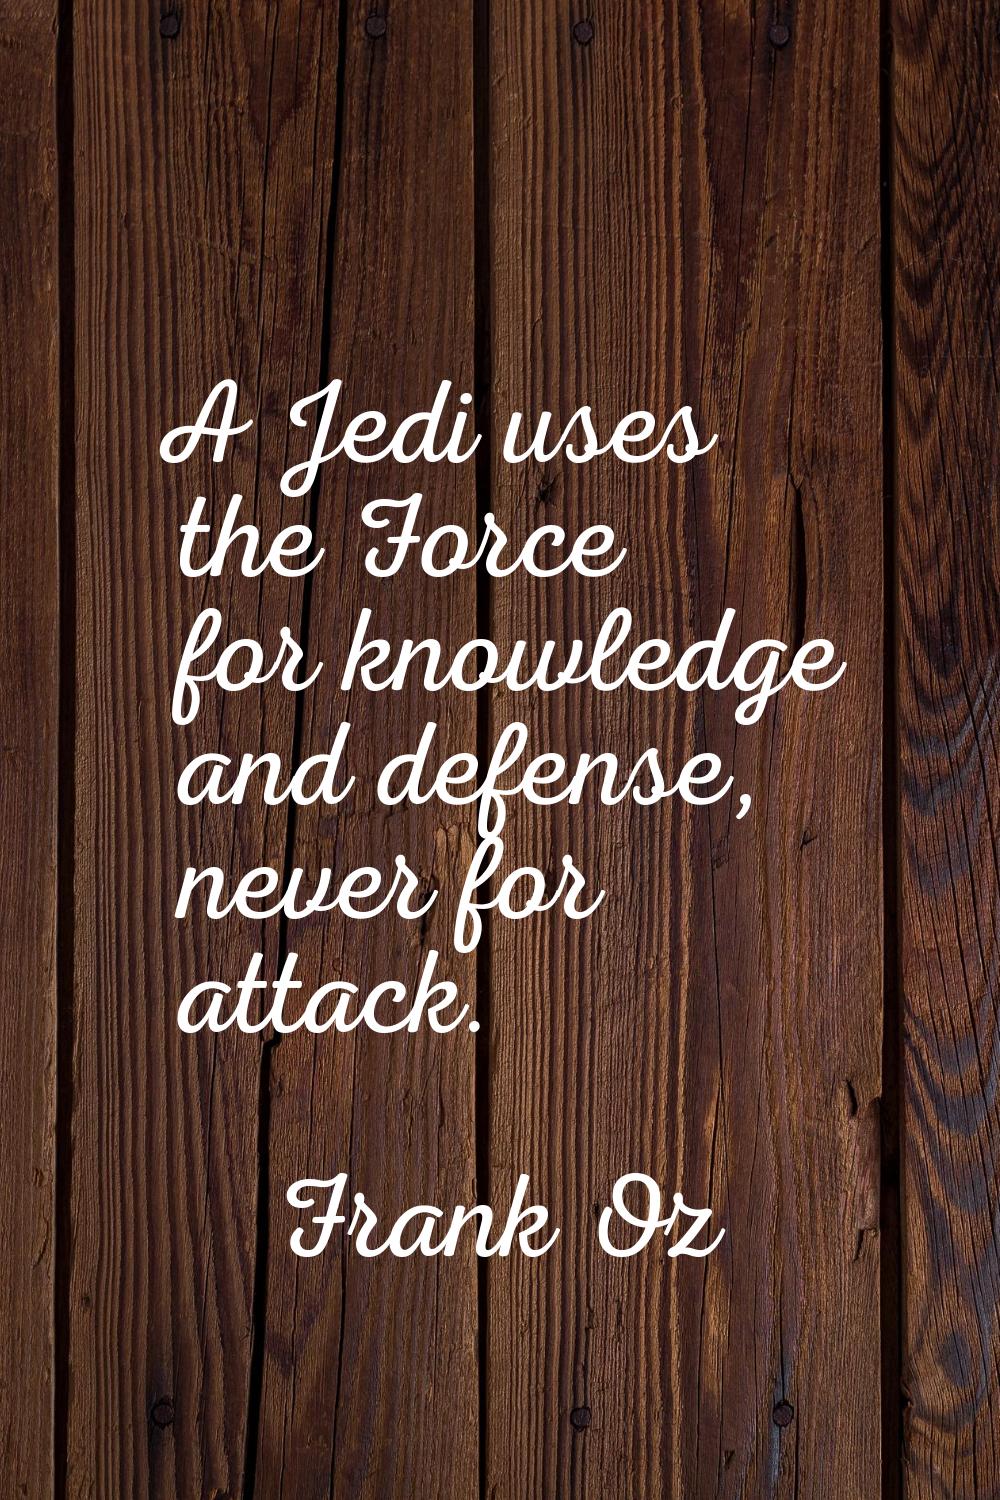 A Jedi uses the Force for knowledge and defense, never for attack.